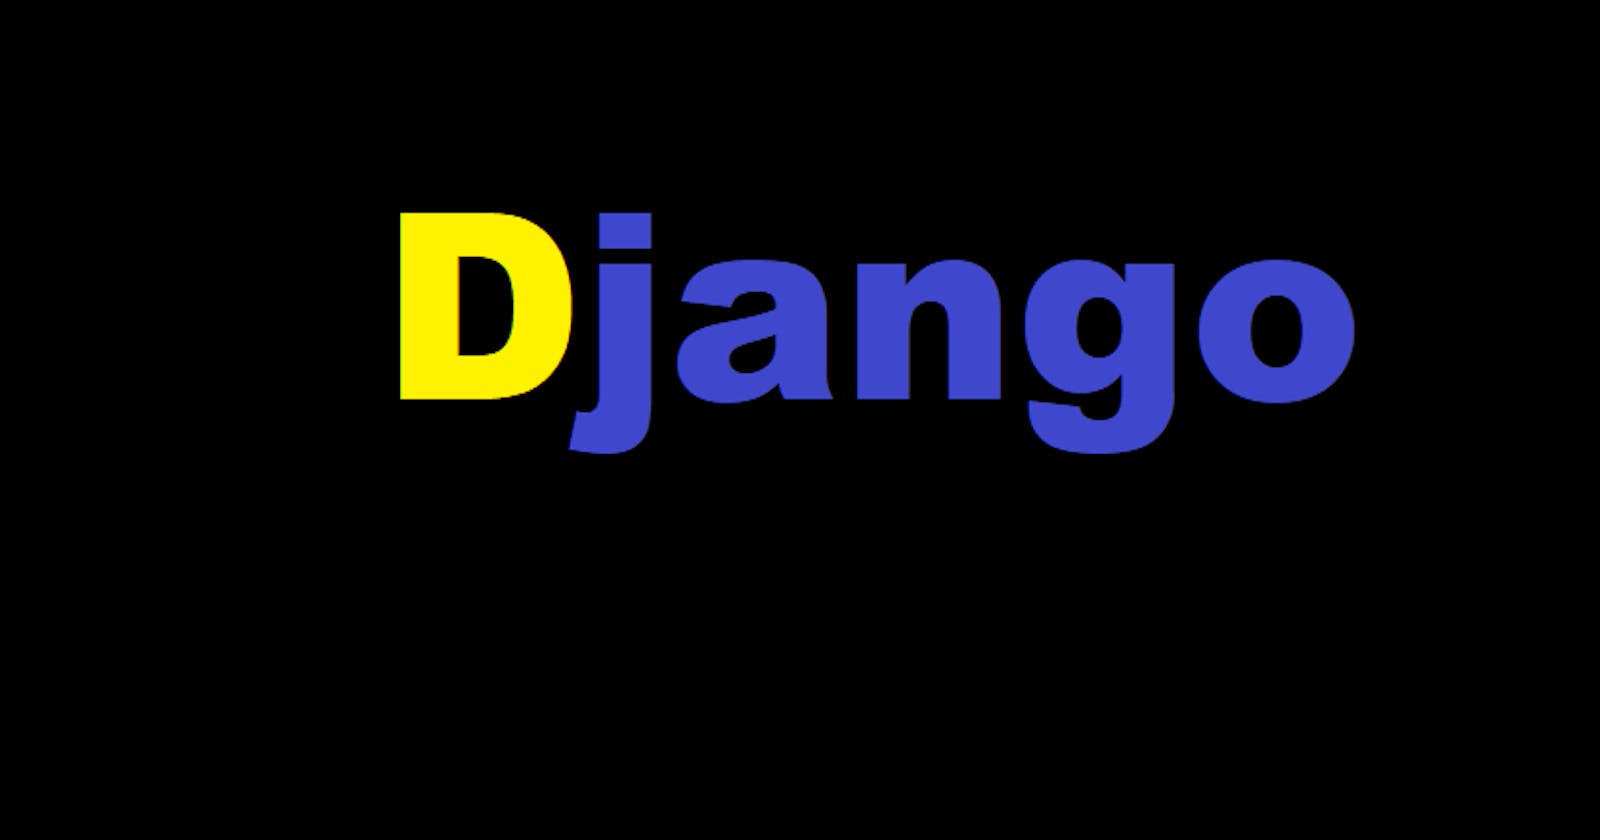 How to deploy Django project on Internet Information Services (IIS)